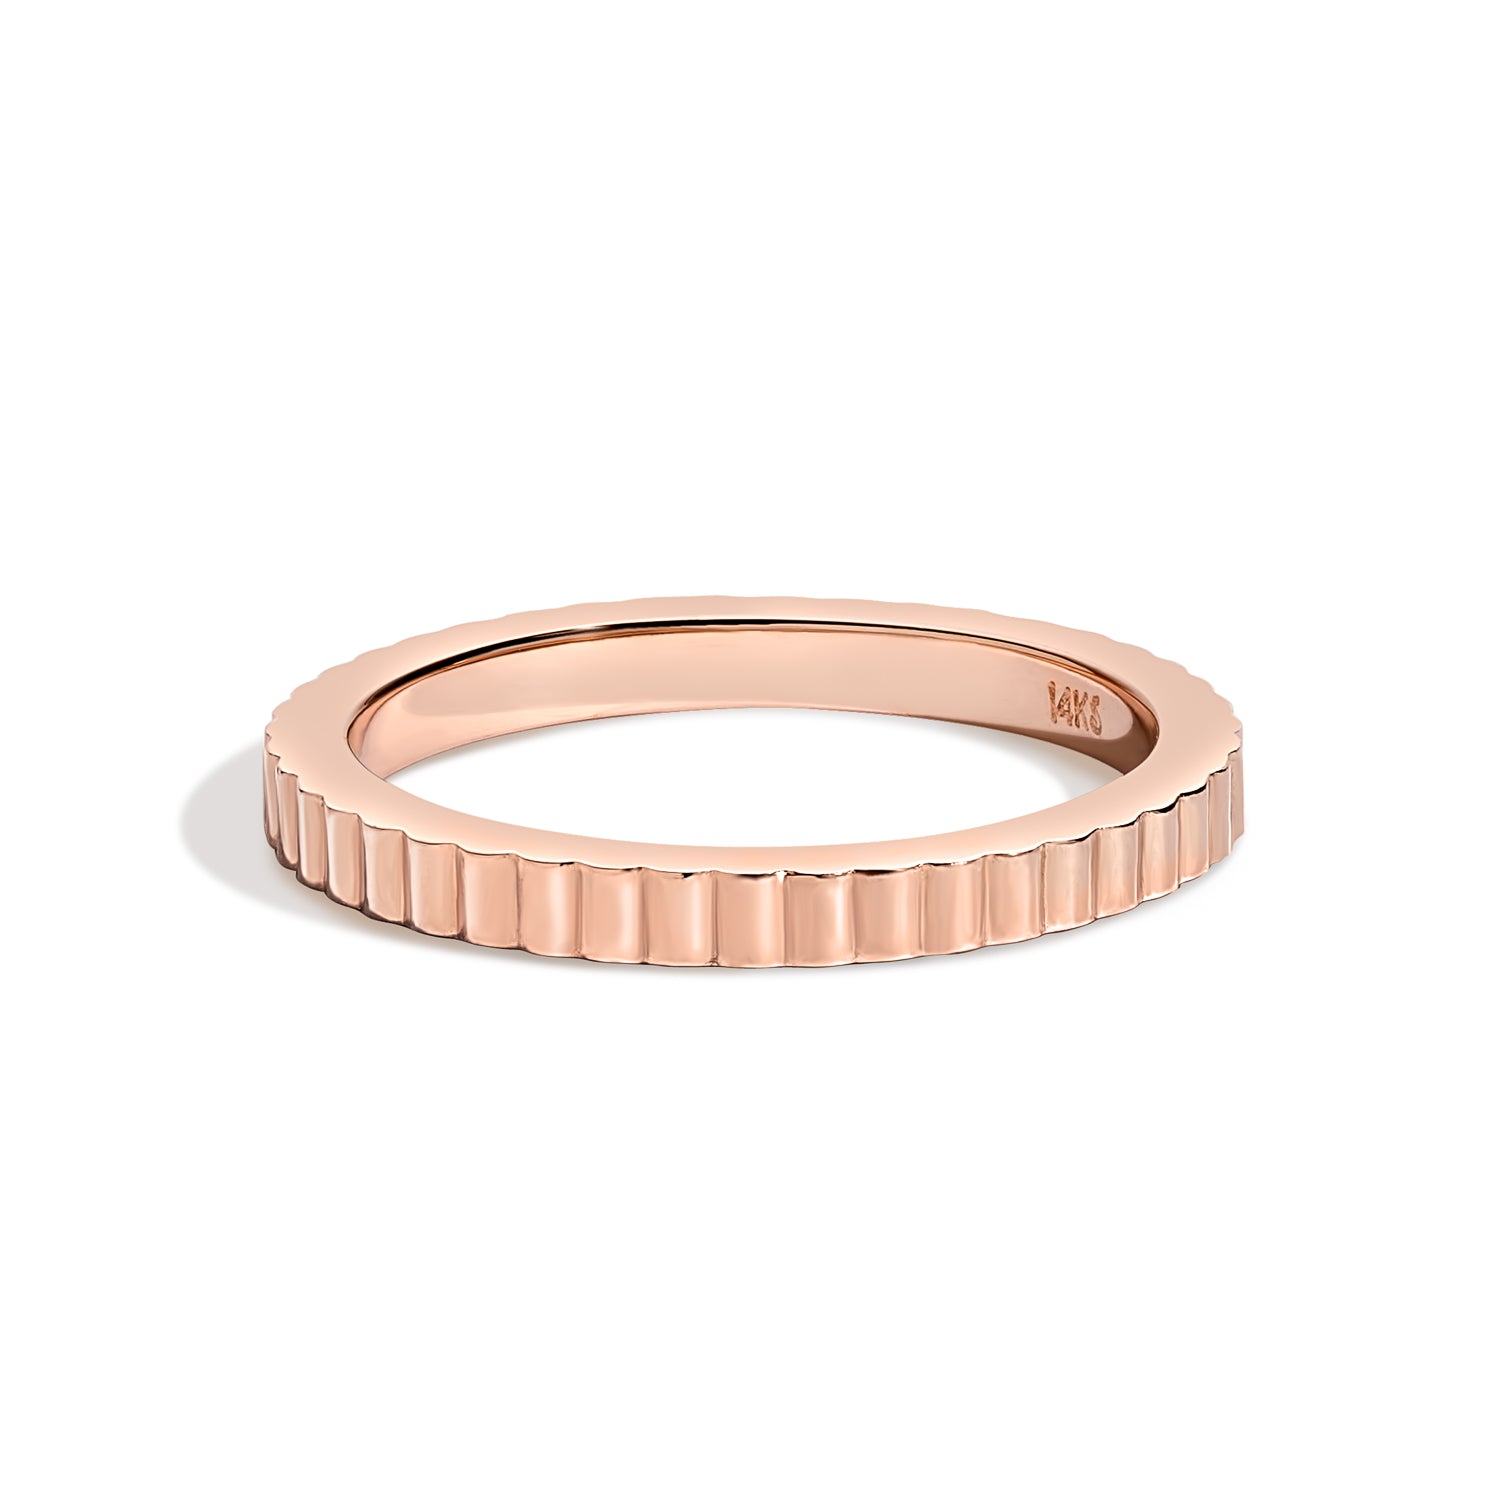 Shahla Karimi Jewelry 2.5mm Grooved Band 14K Rose Gold